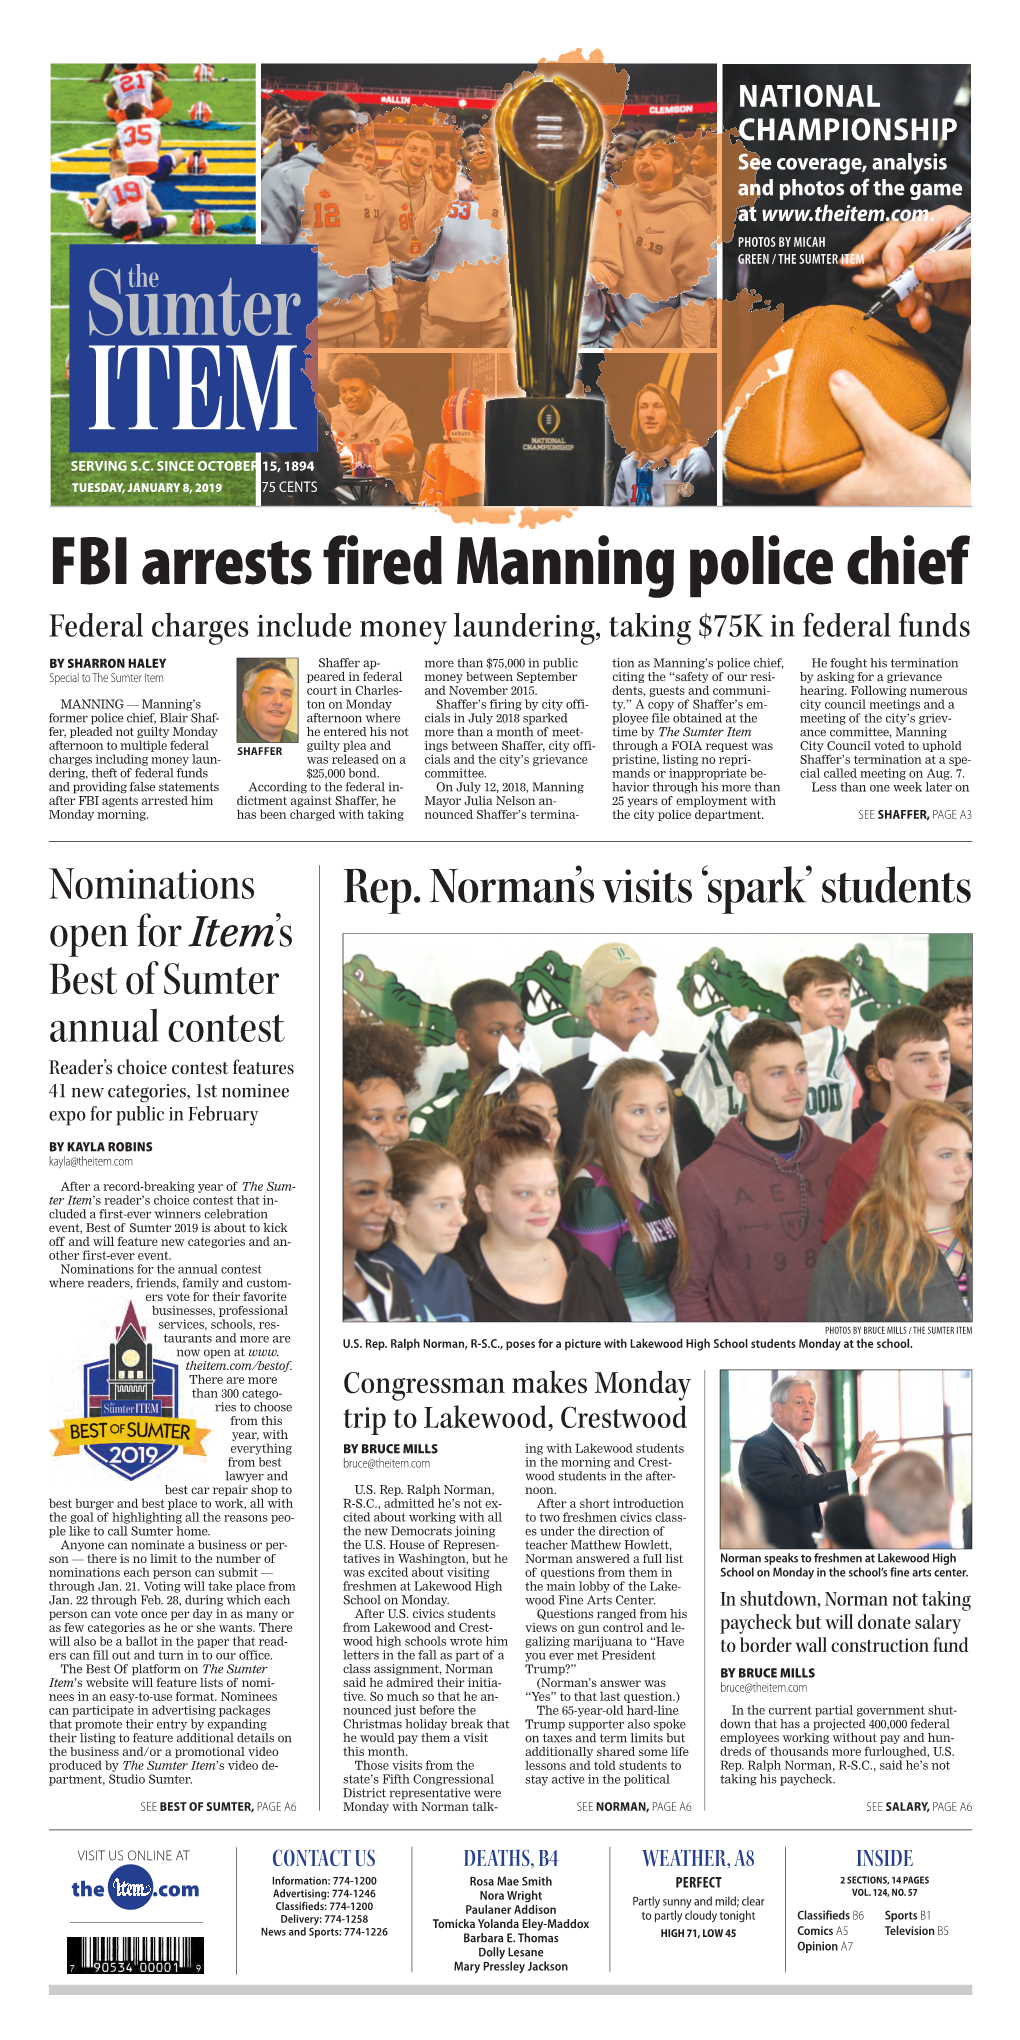 FBI Arrests Fired Manning Police Chief Federal Charges Include Money Laundering, Taking $75K in Federal Funds